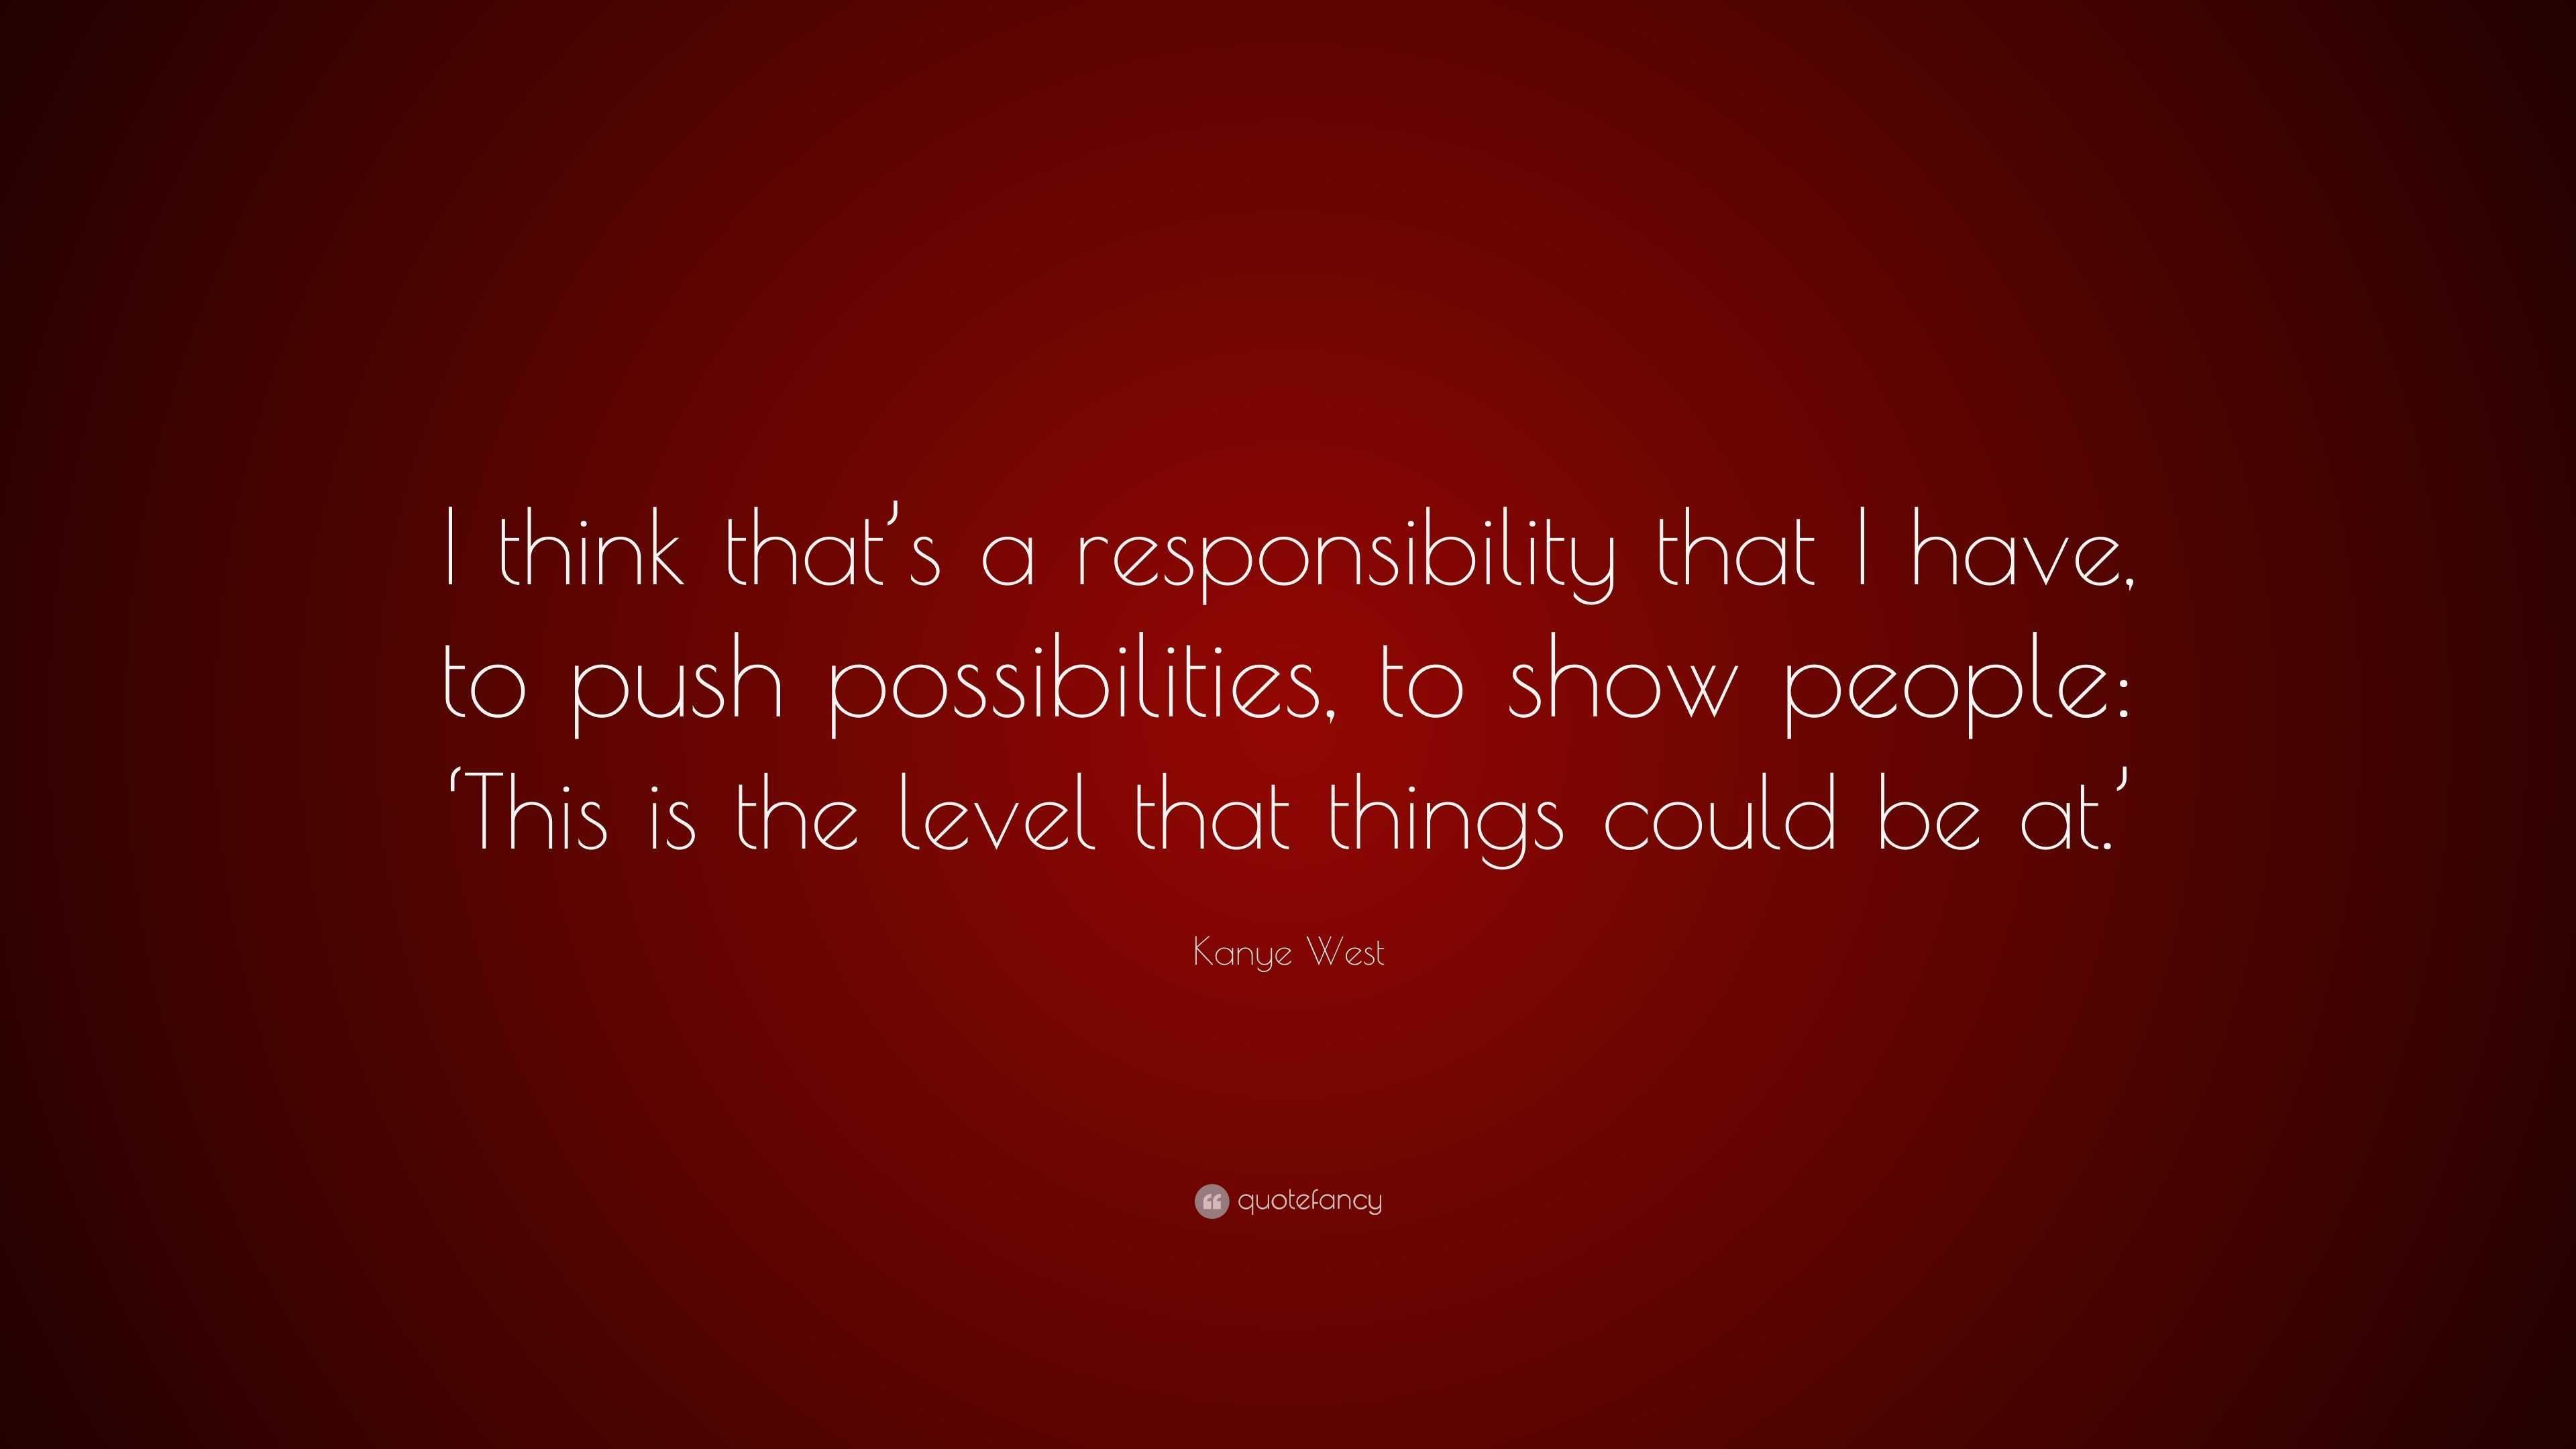 Kanye West Quote: “I think that's a responsibility that I have, to ...